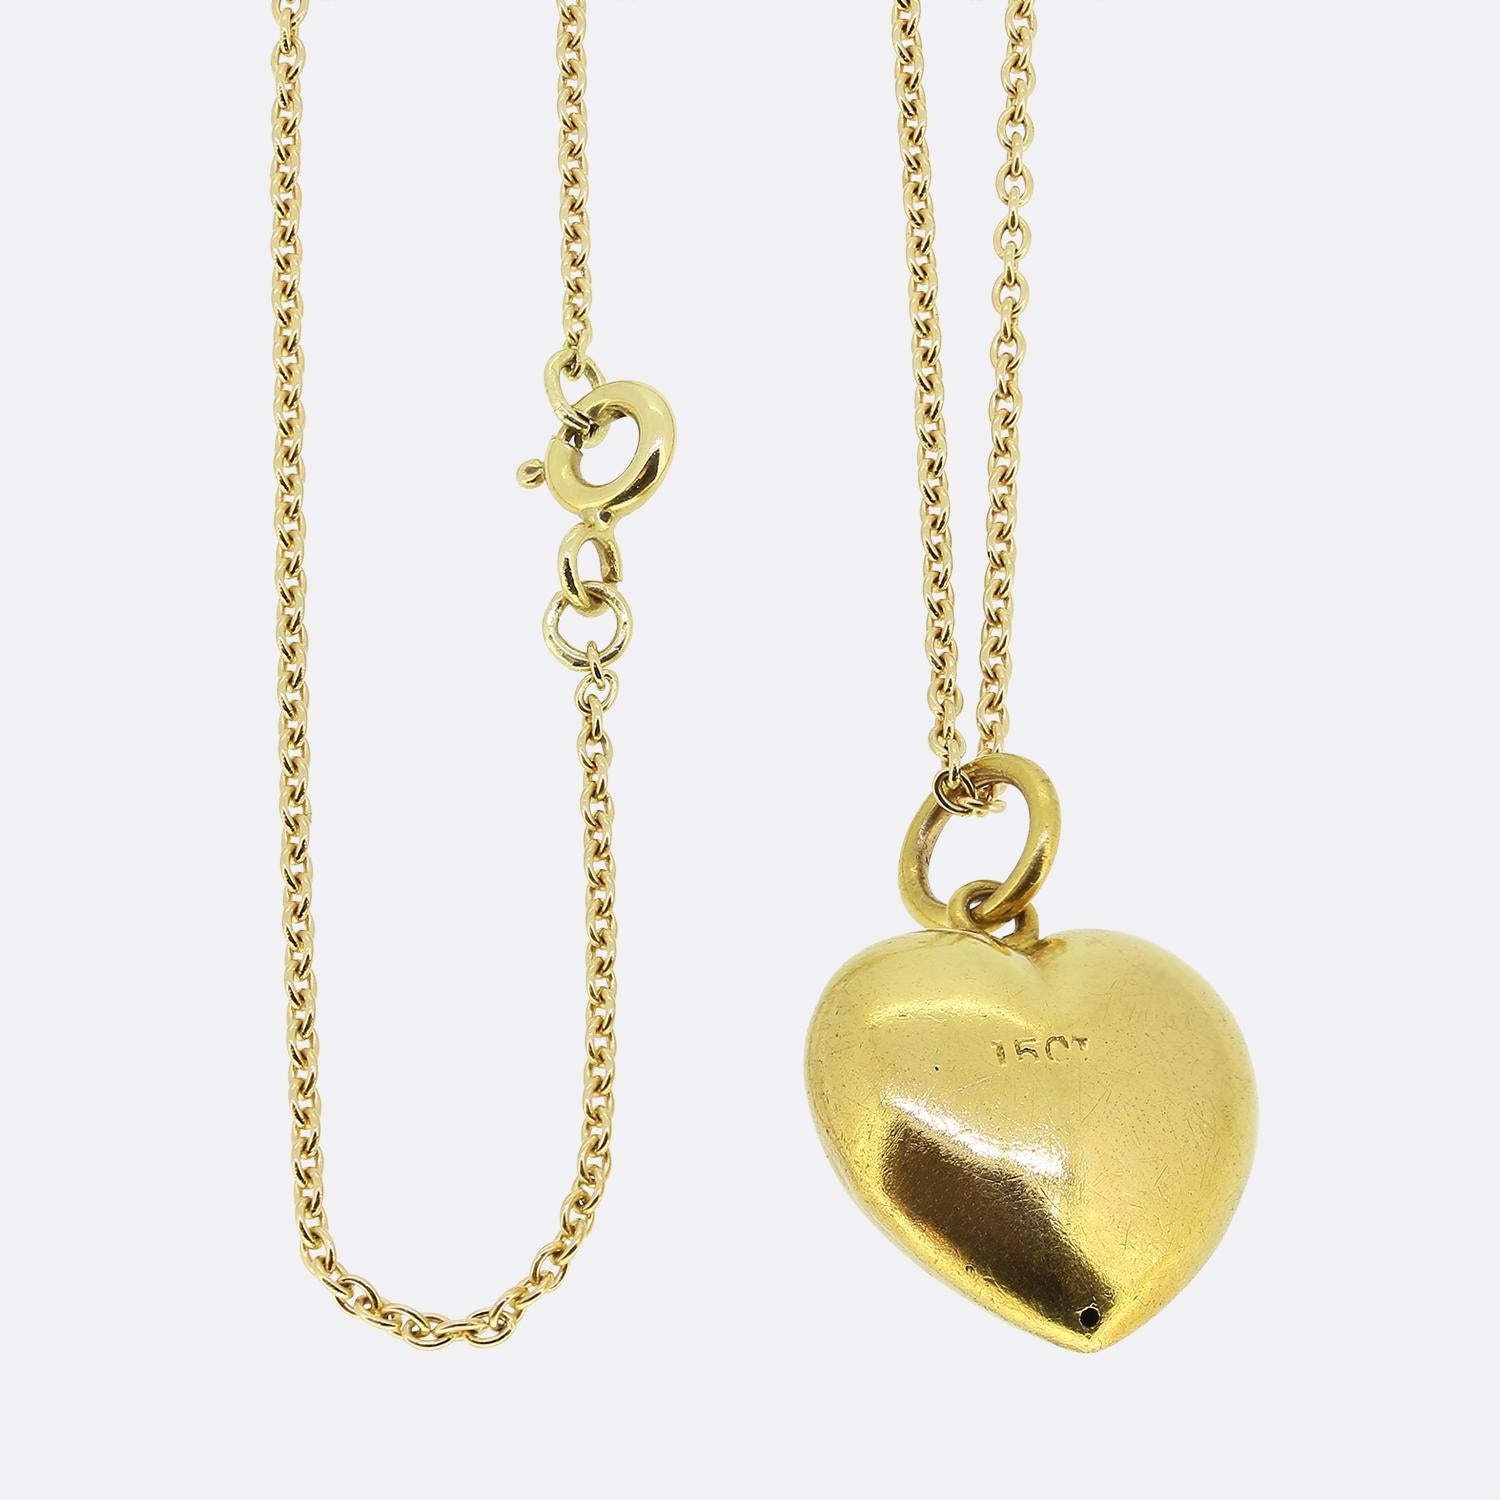 Here we have a lovely pearl pendant necklace. This antique pendant has been crafted from 15ct yellow gold into the the shape of a little love heart. The piece has then been expertly set with a single round shaped natural pearl at the centre